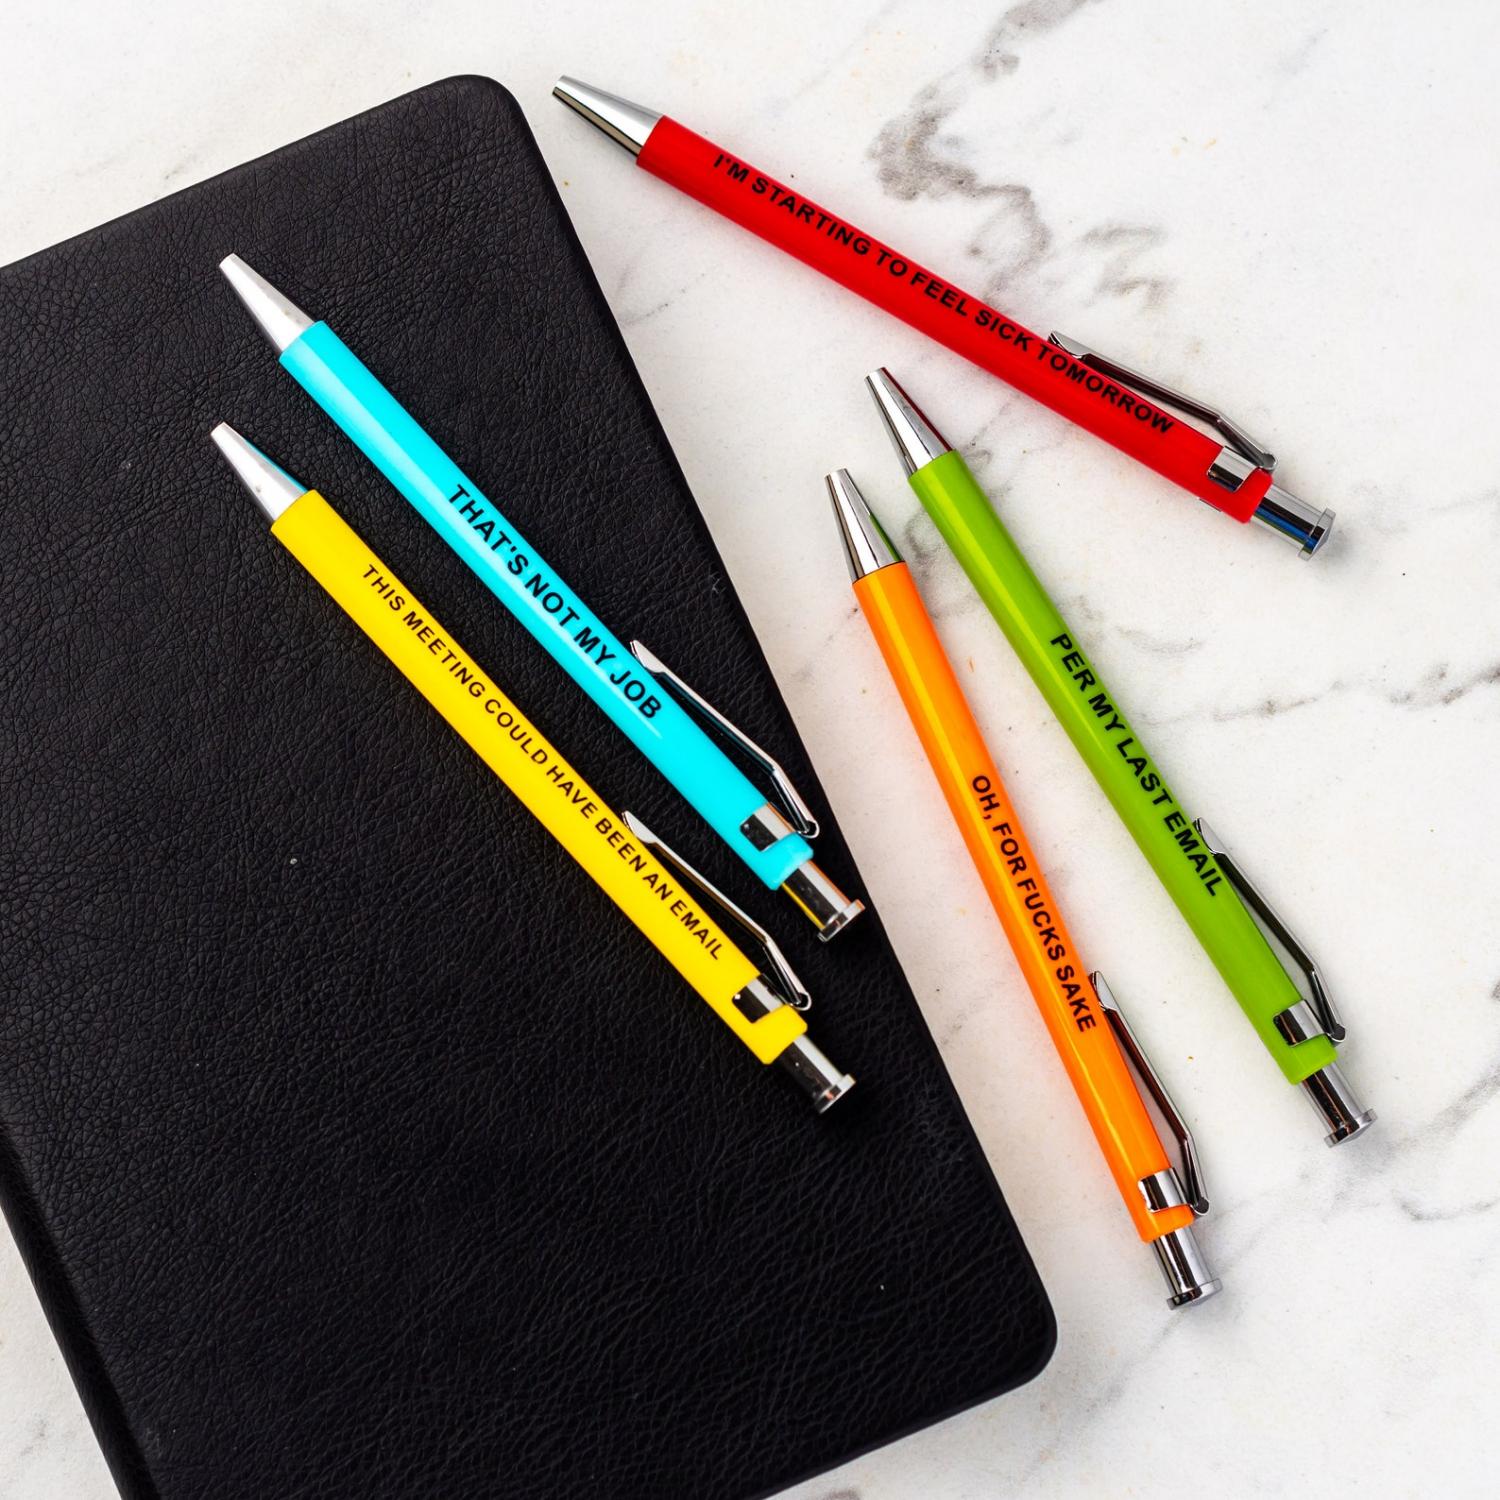 These Offensive Office Pens Are The Ideal Way To Retaliate Against Obnoxious Coworkers